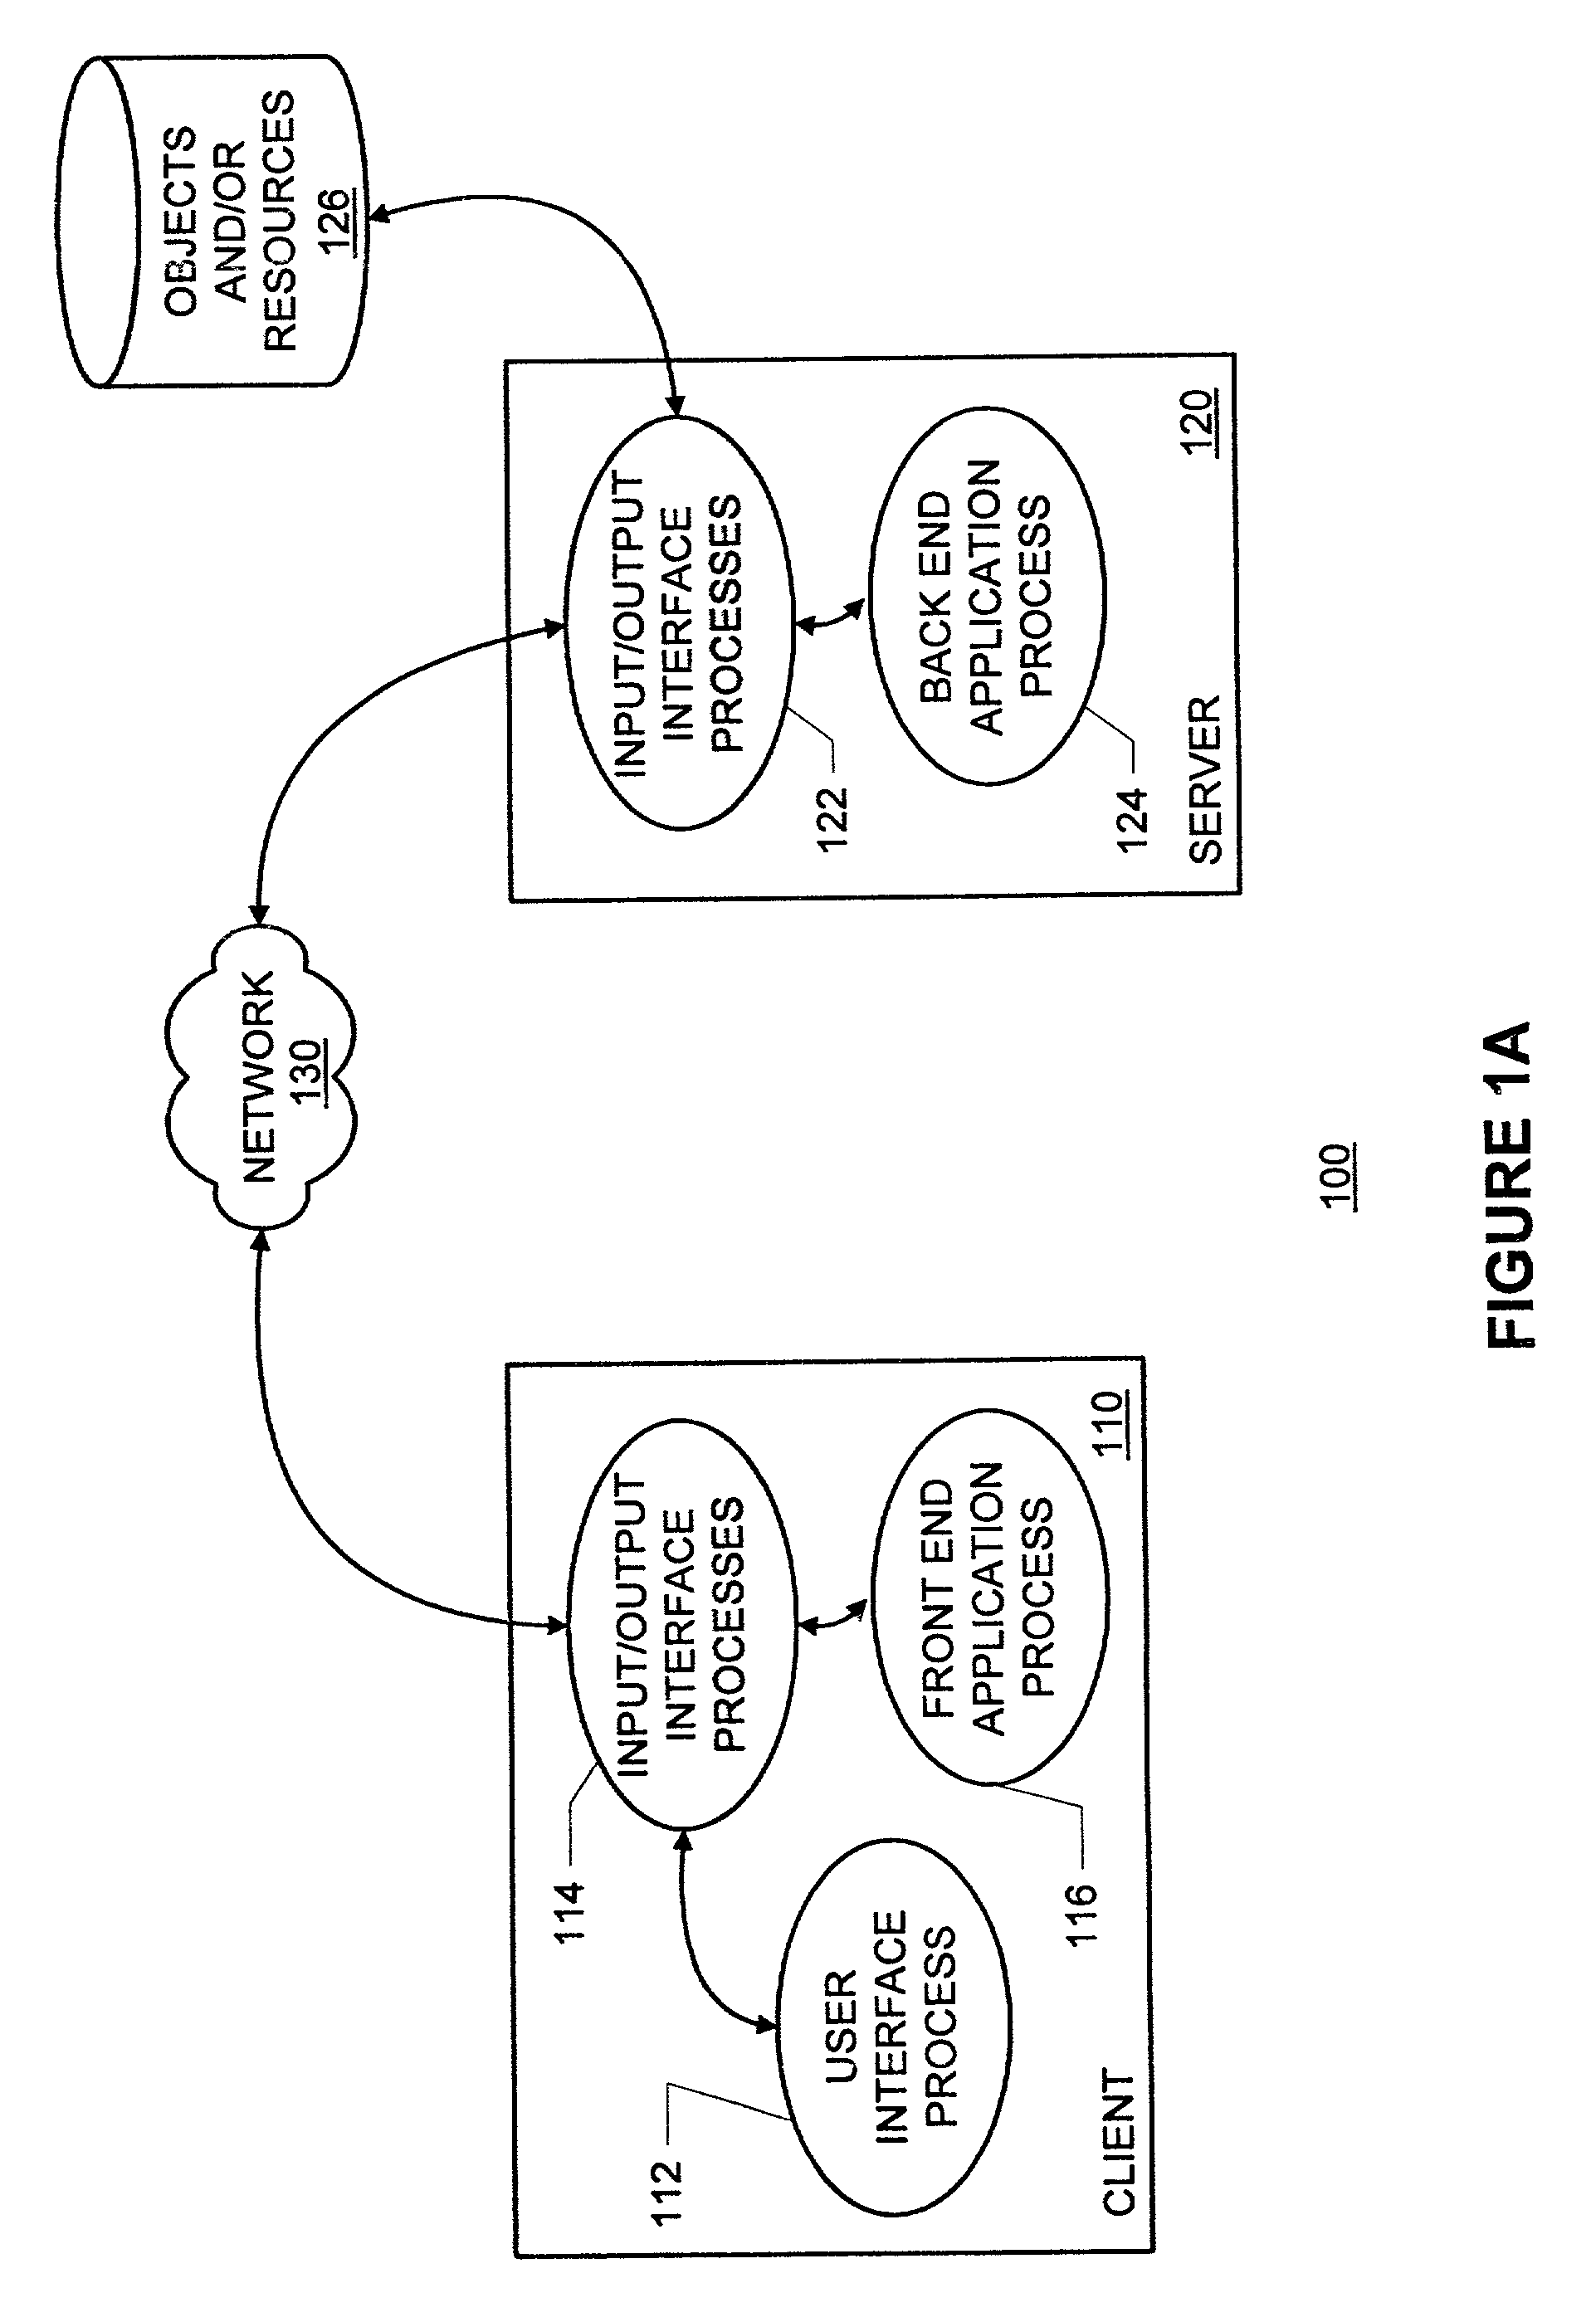 Methods, apparatus and data structures for providing a uniform representation of various types of information